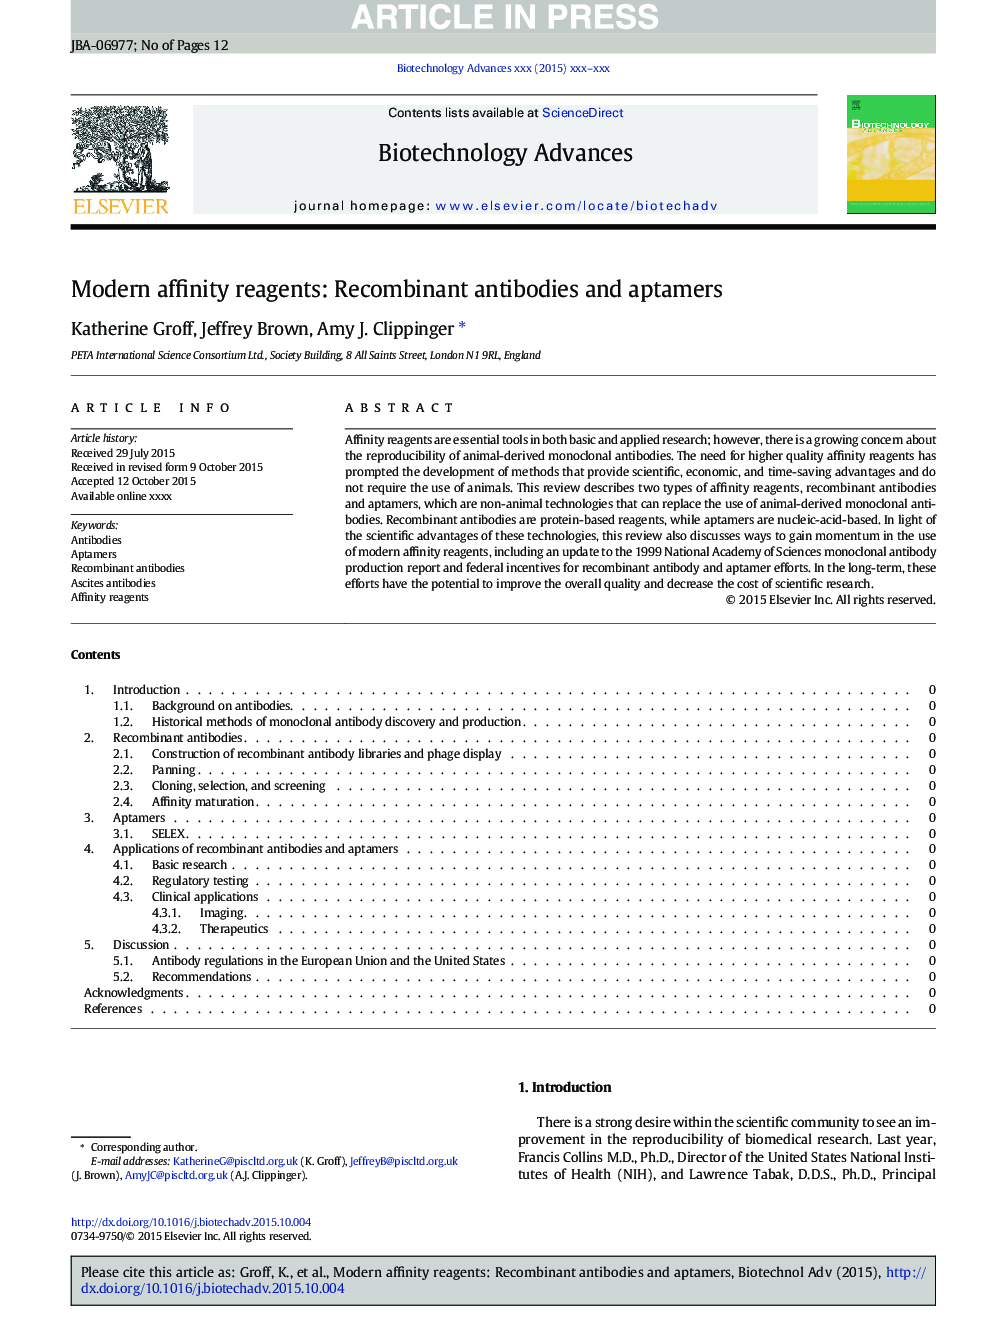 Modern affinity reagents: Recombinant antibodies and aptamers